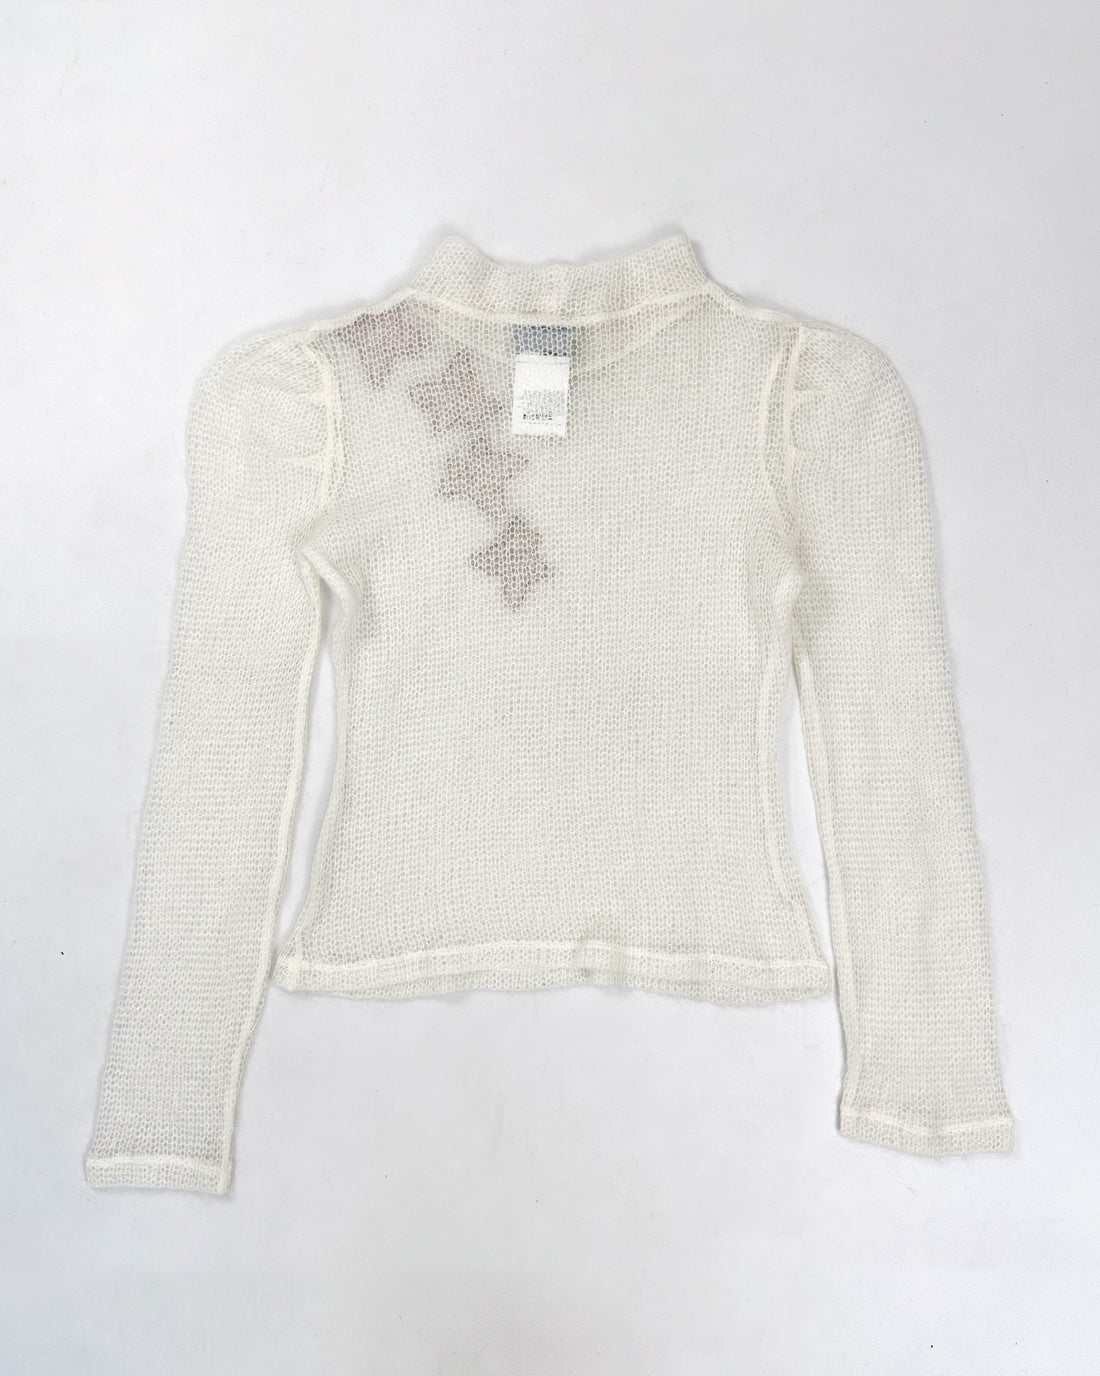 Armani Mohair Decorated White Mesh Top 2000's